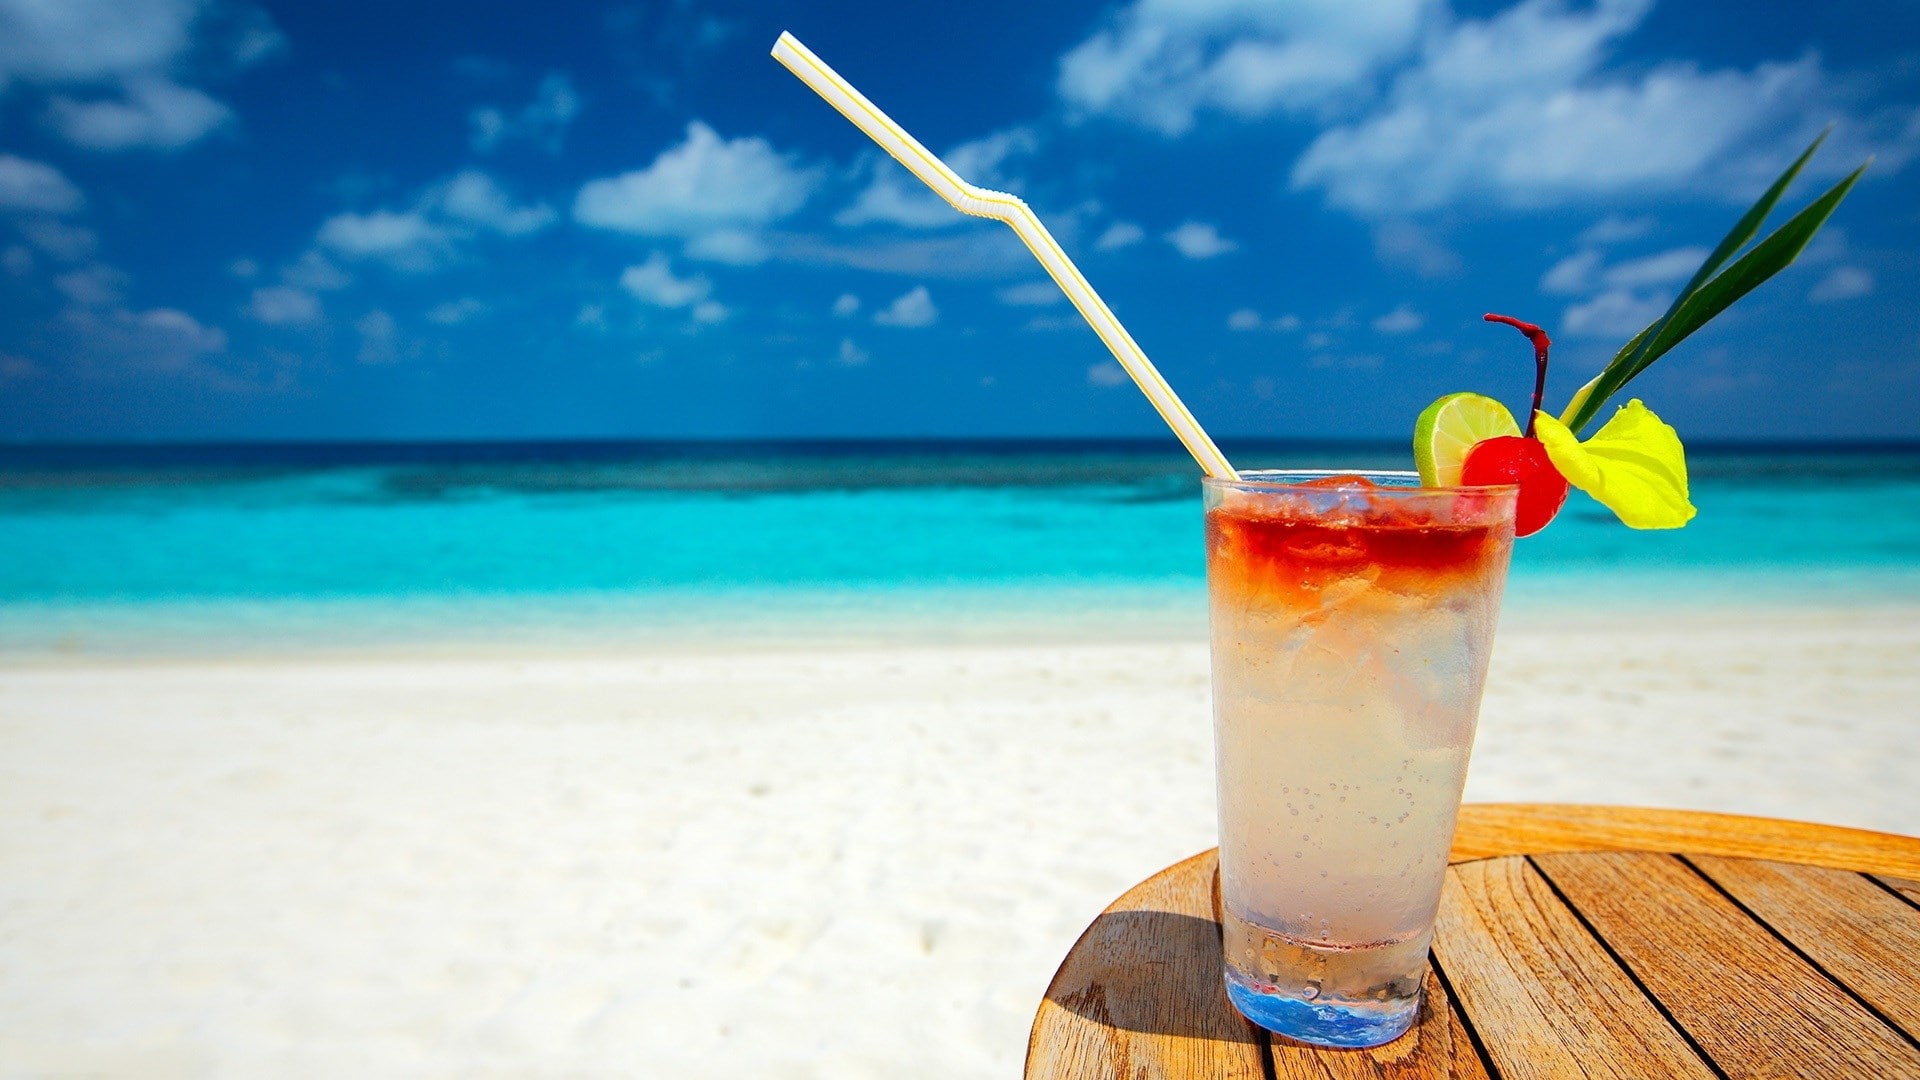 summer desktop backgrounds, food and drink, refreshment, straw